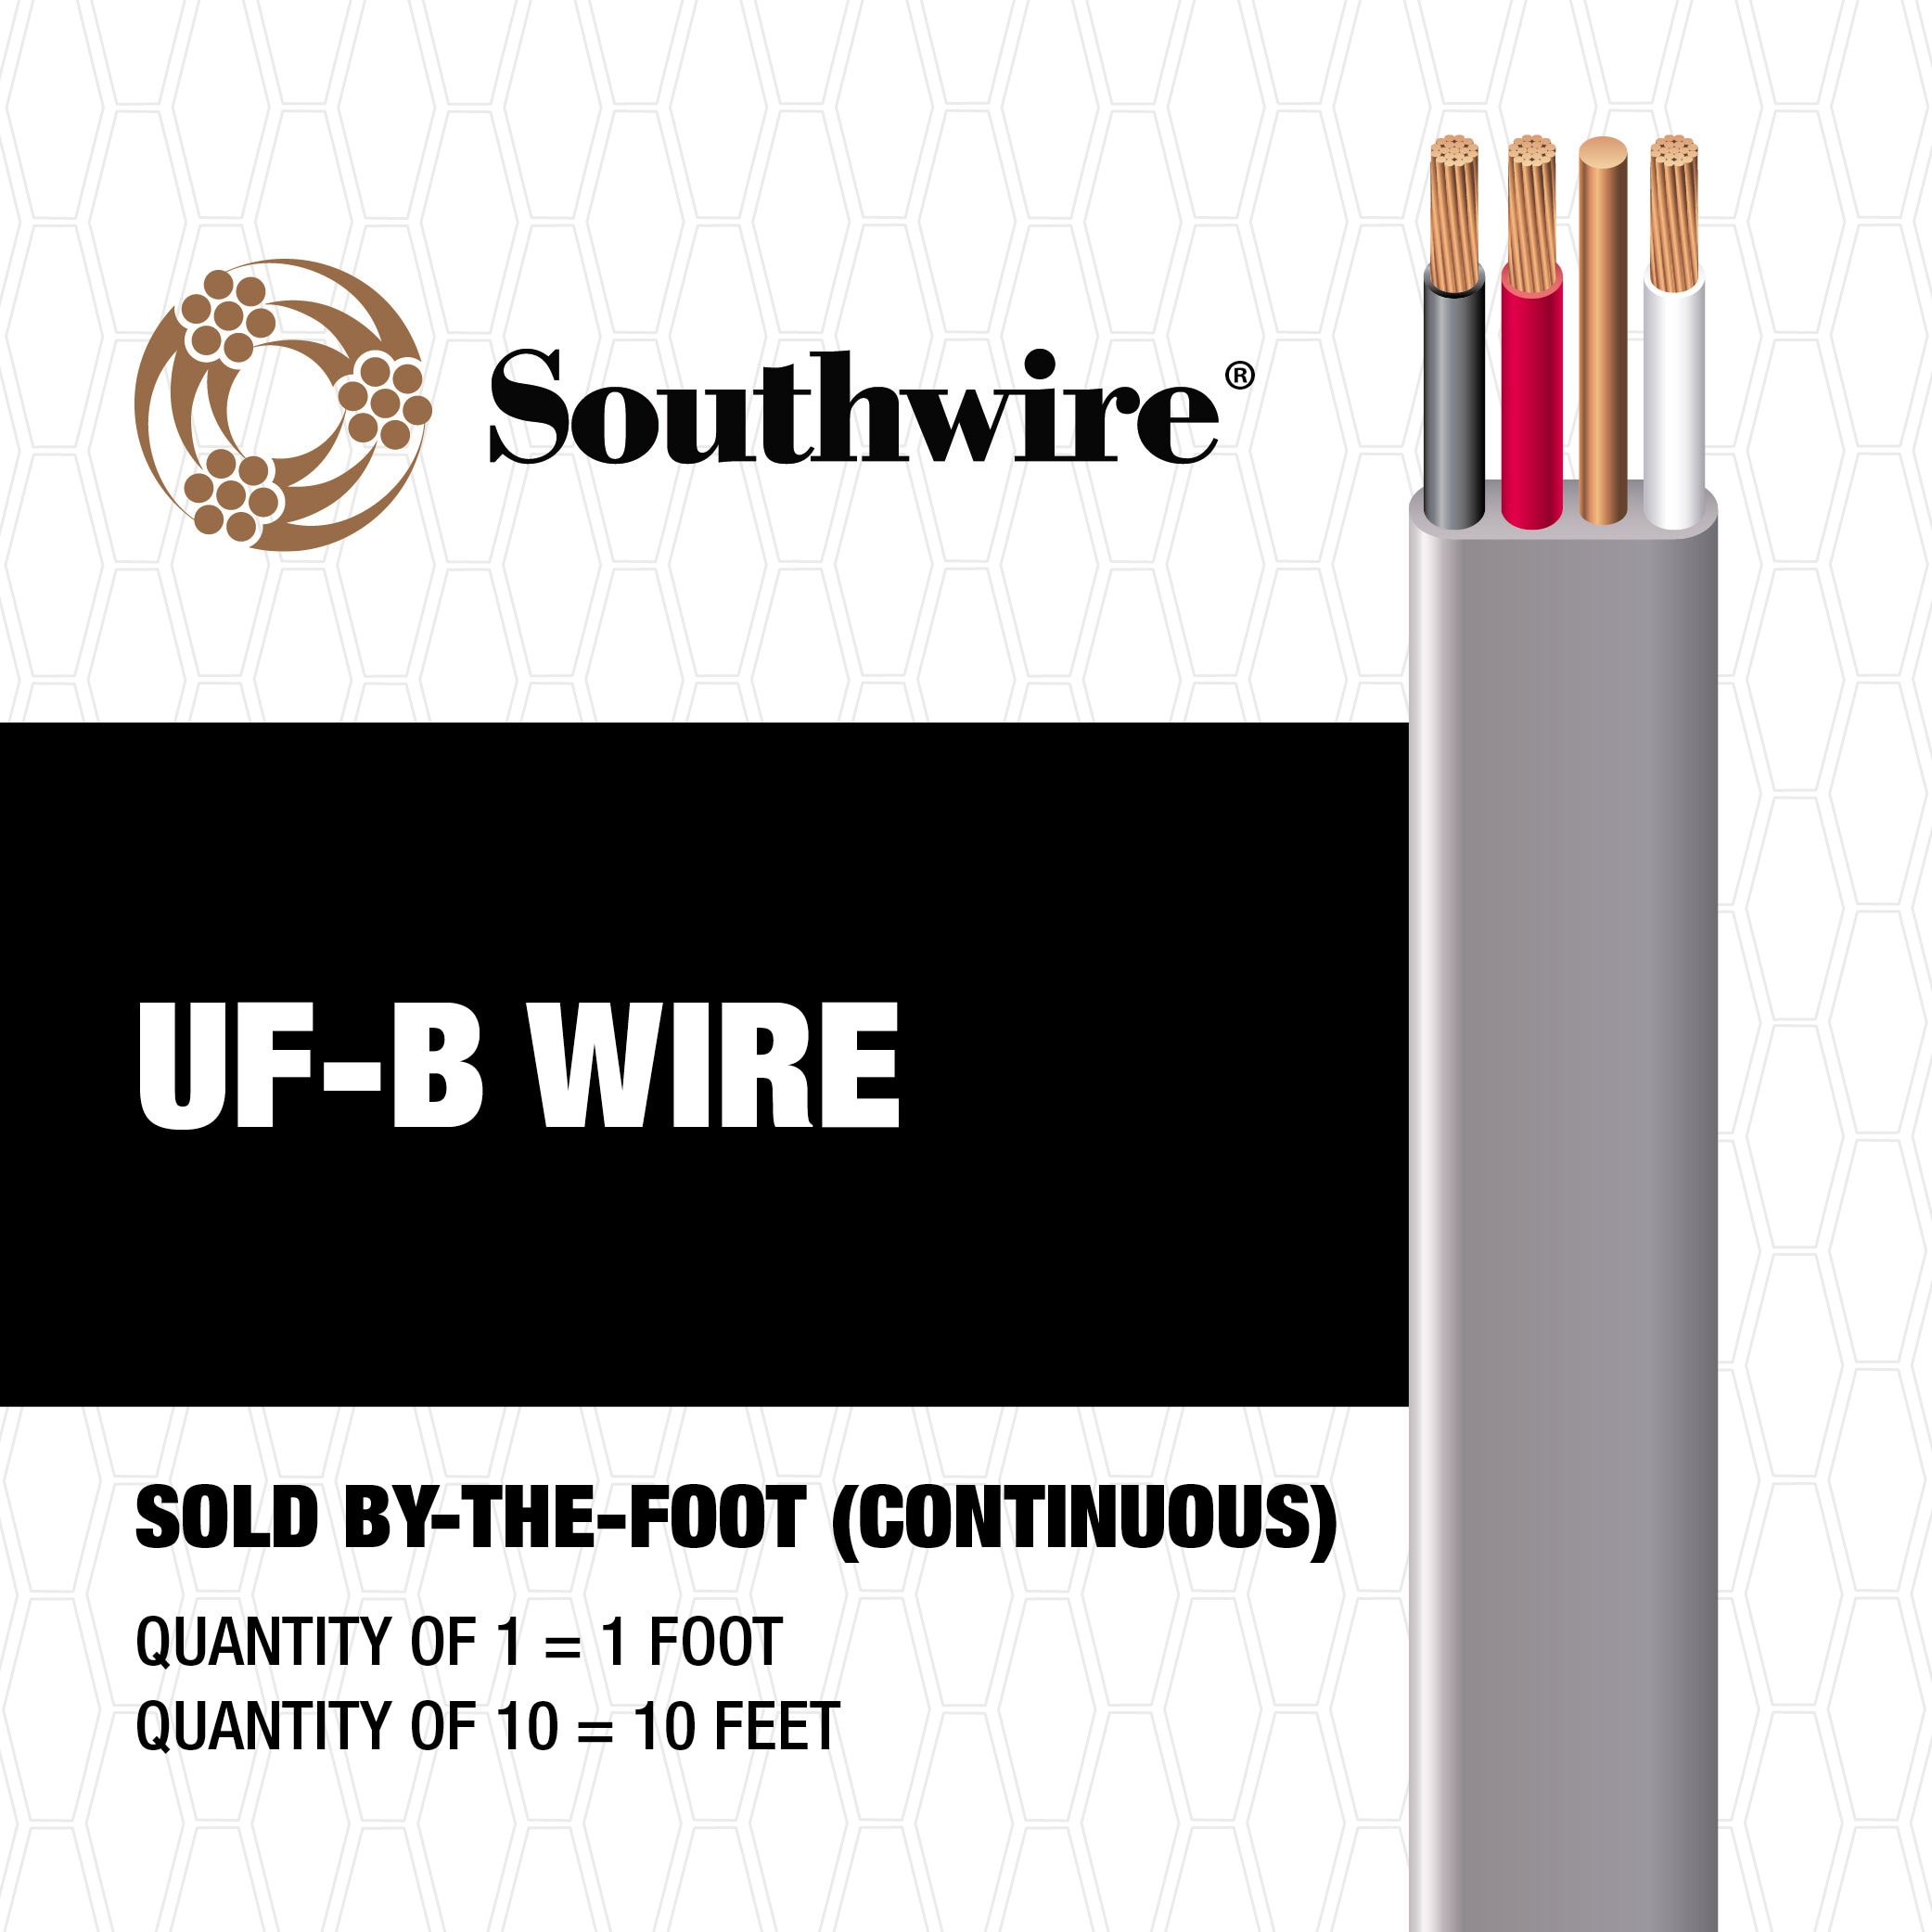 Copper Round Wire Five Feet - Multiple Sizes